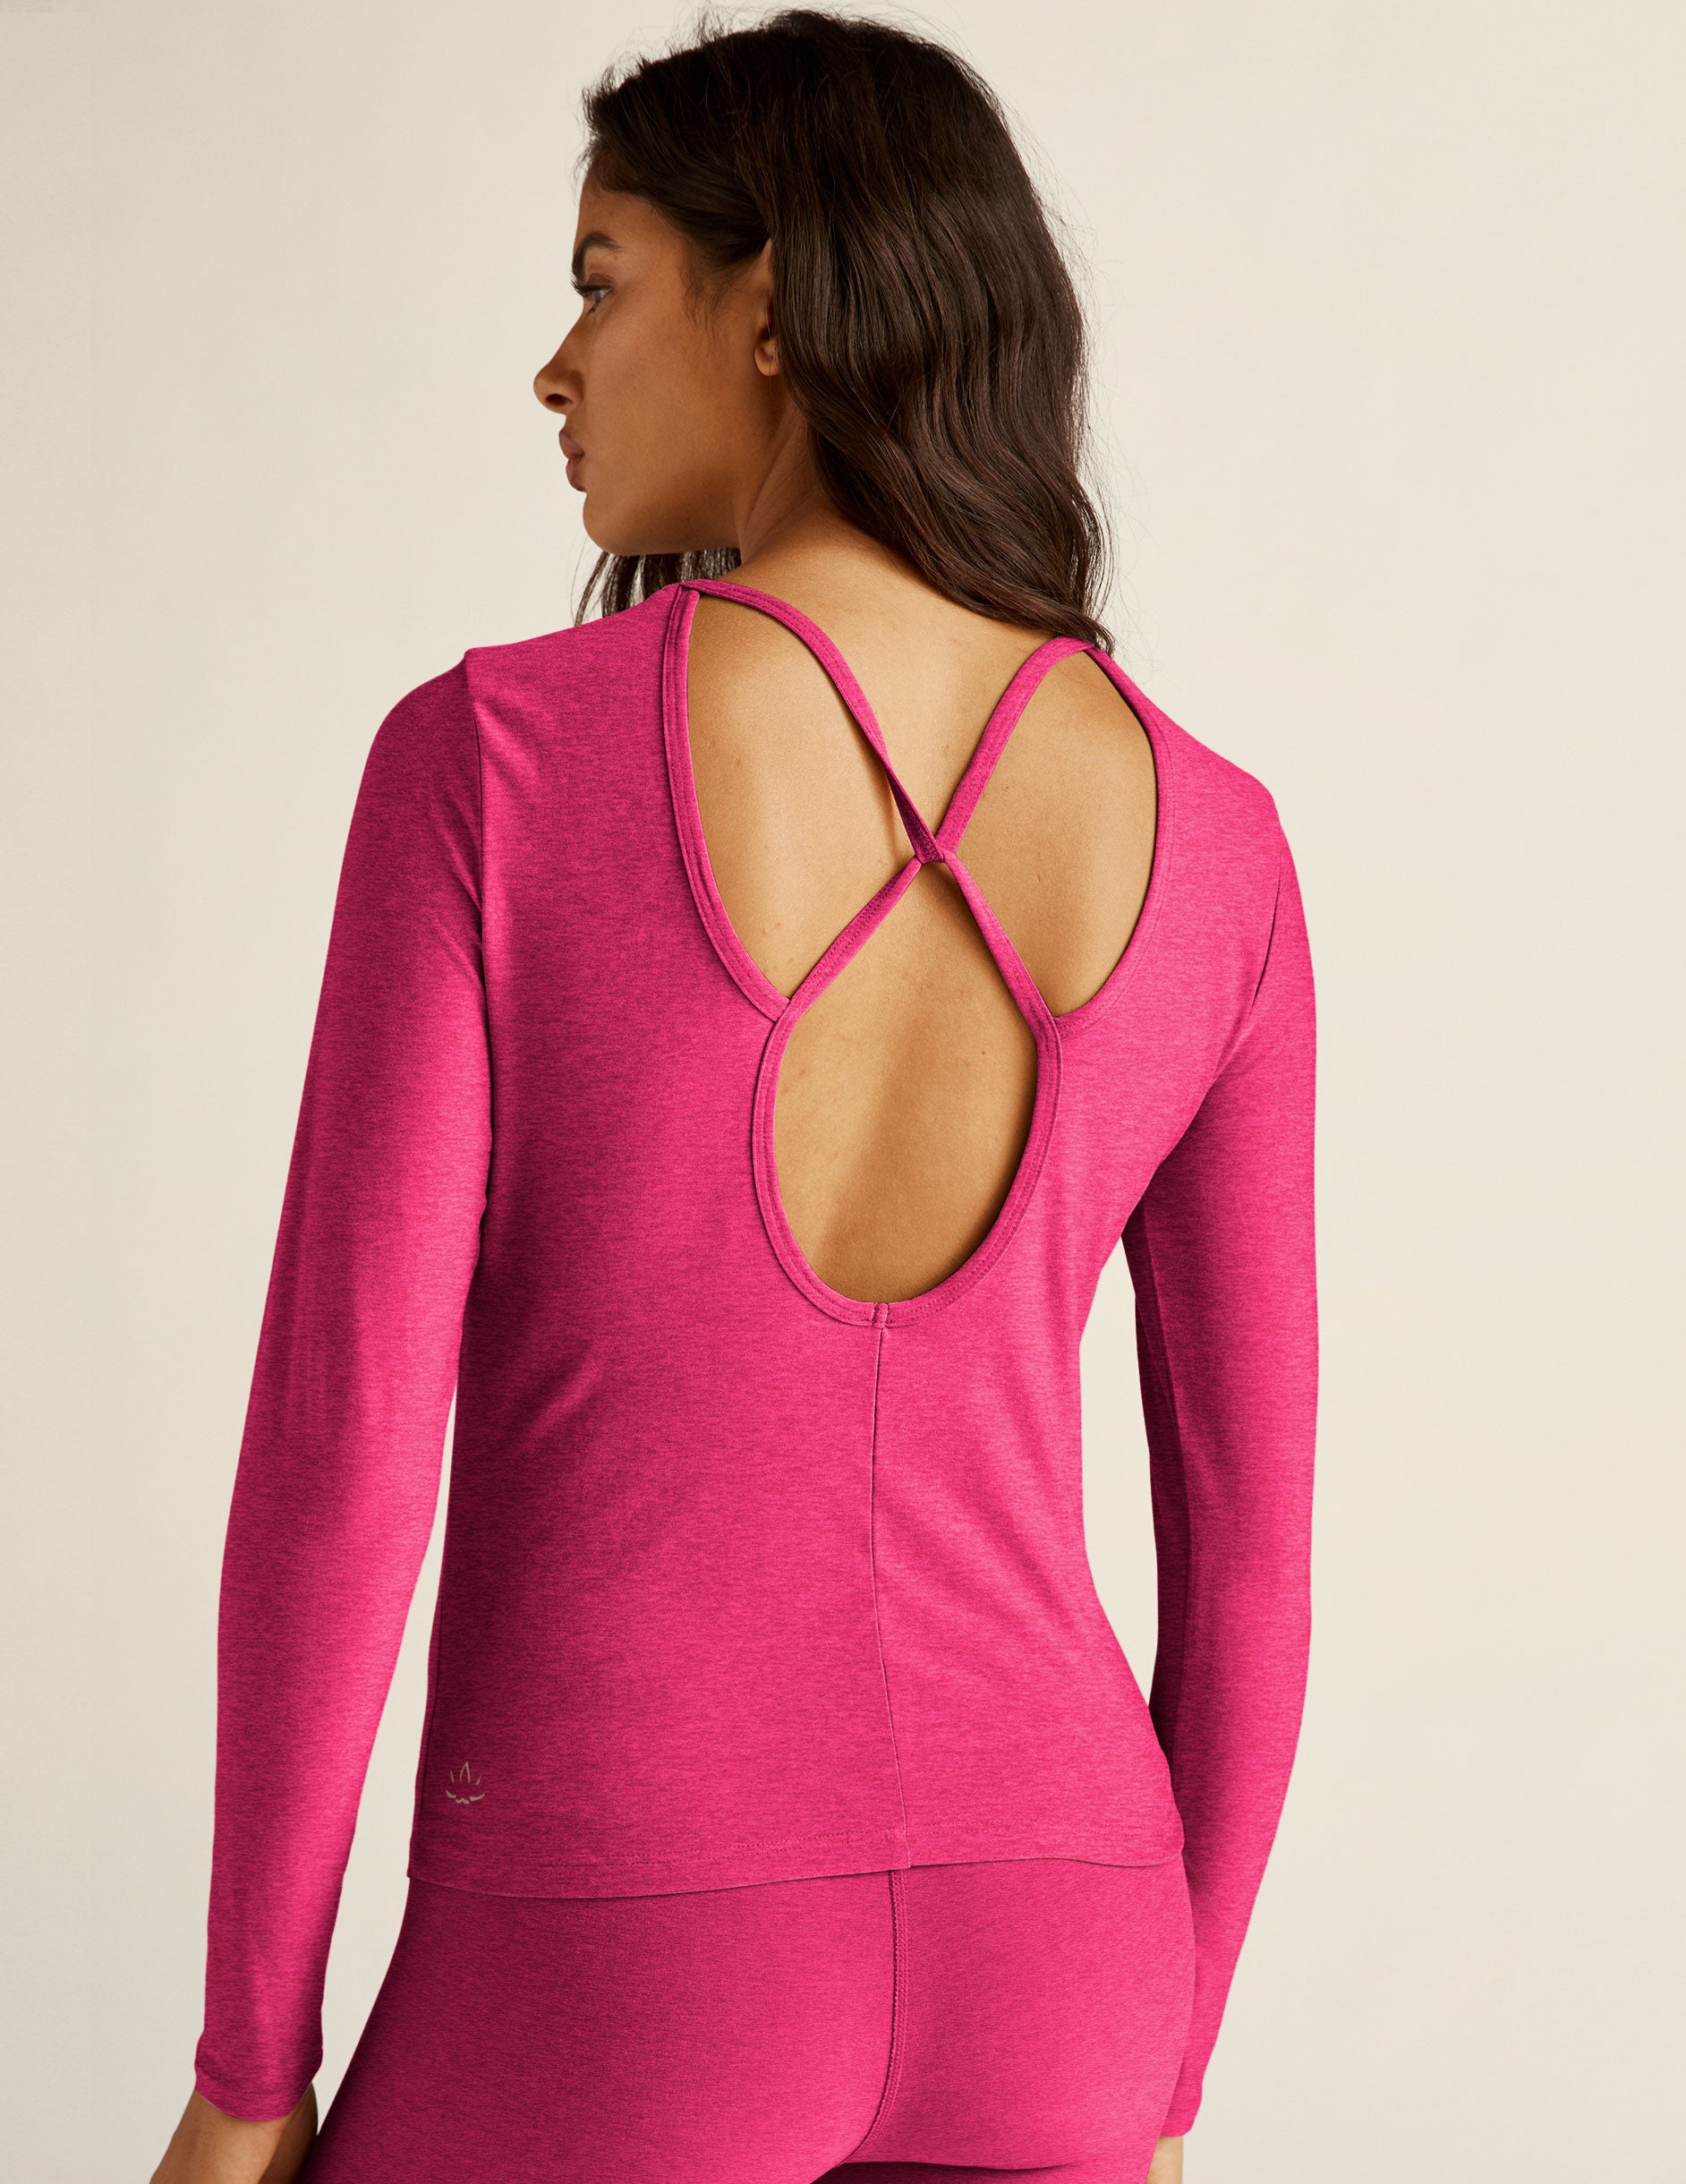 red long sleeve top with Open back with twisted strap detail